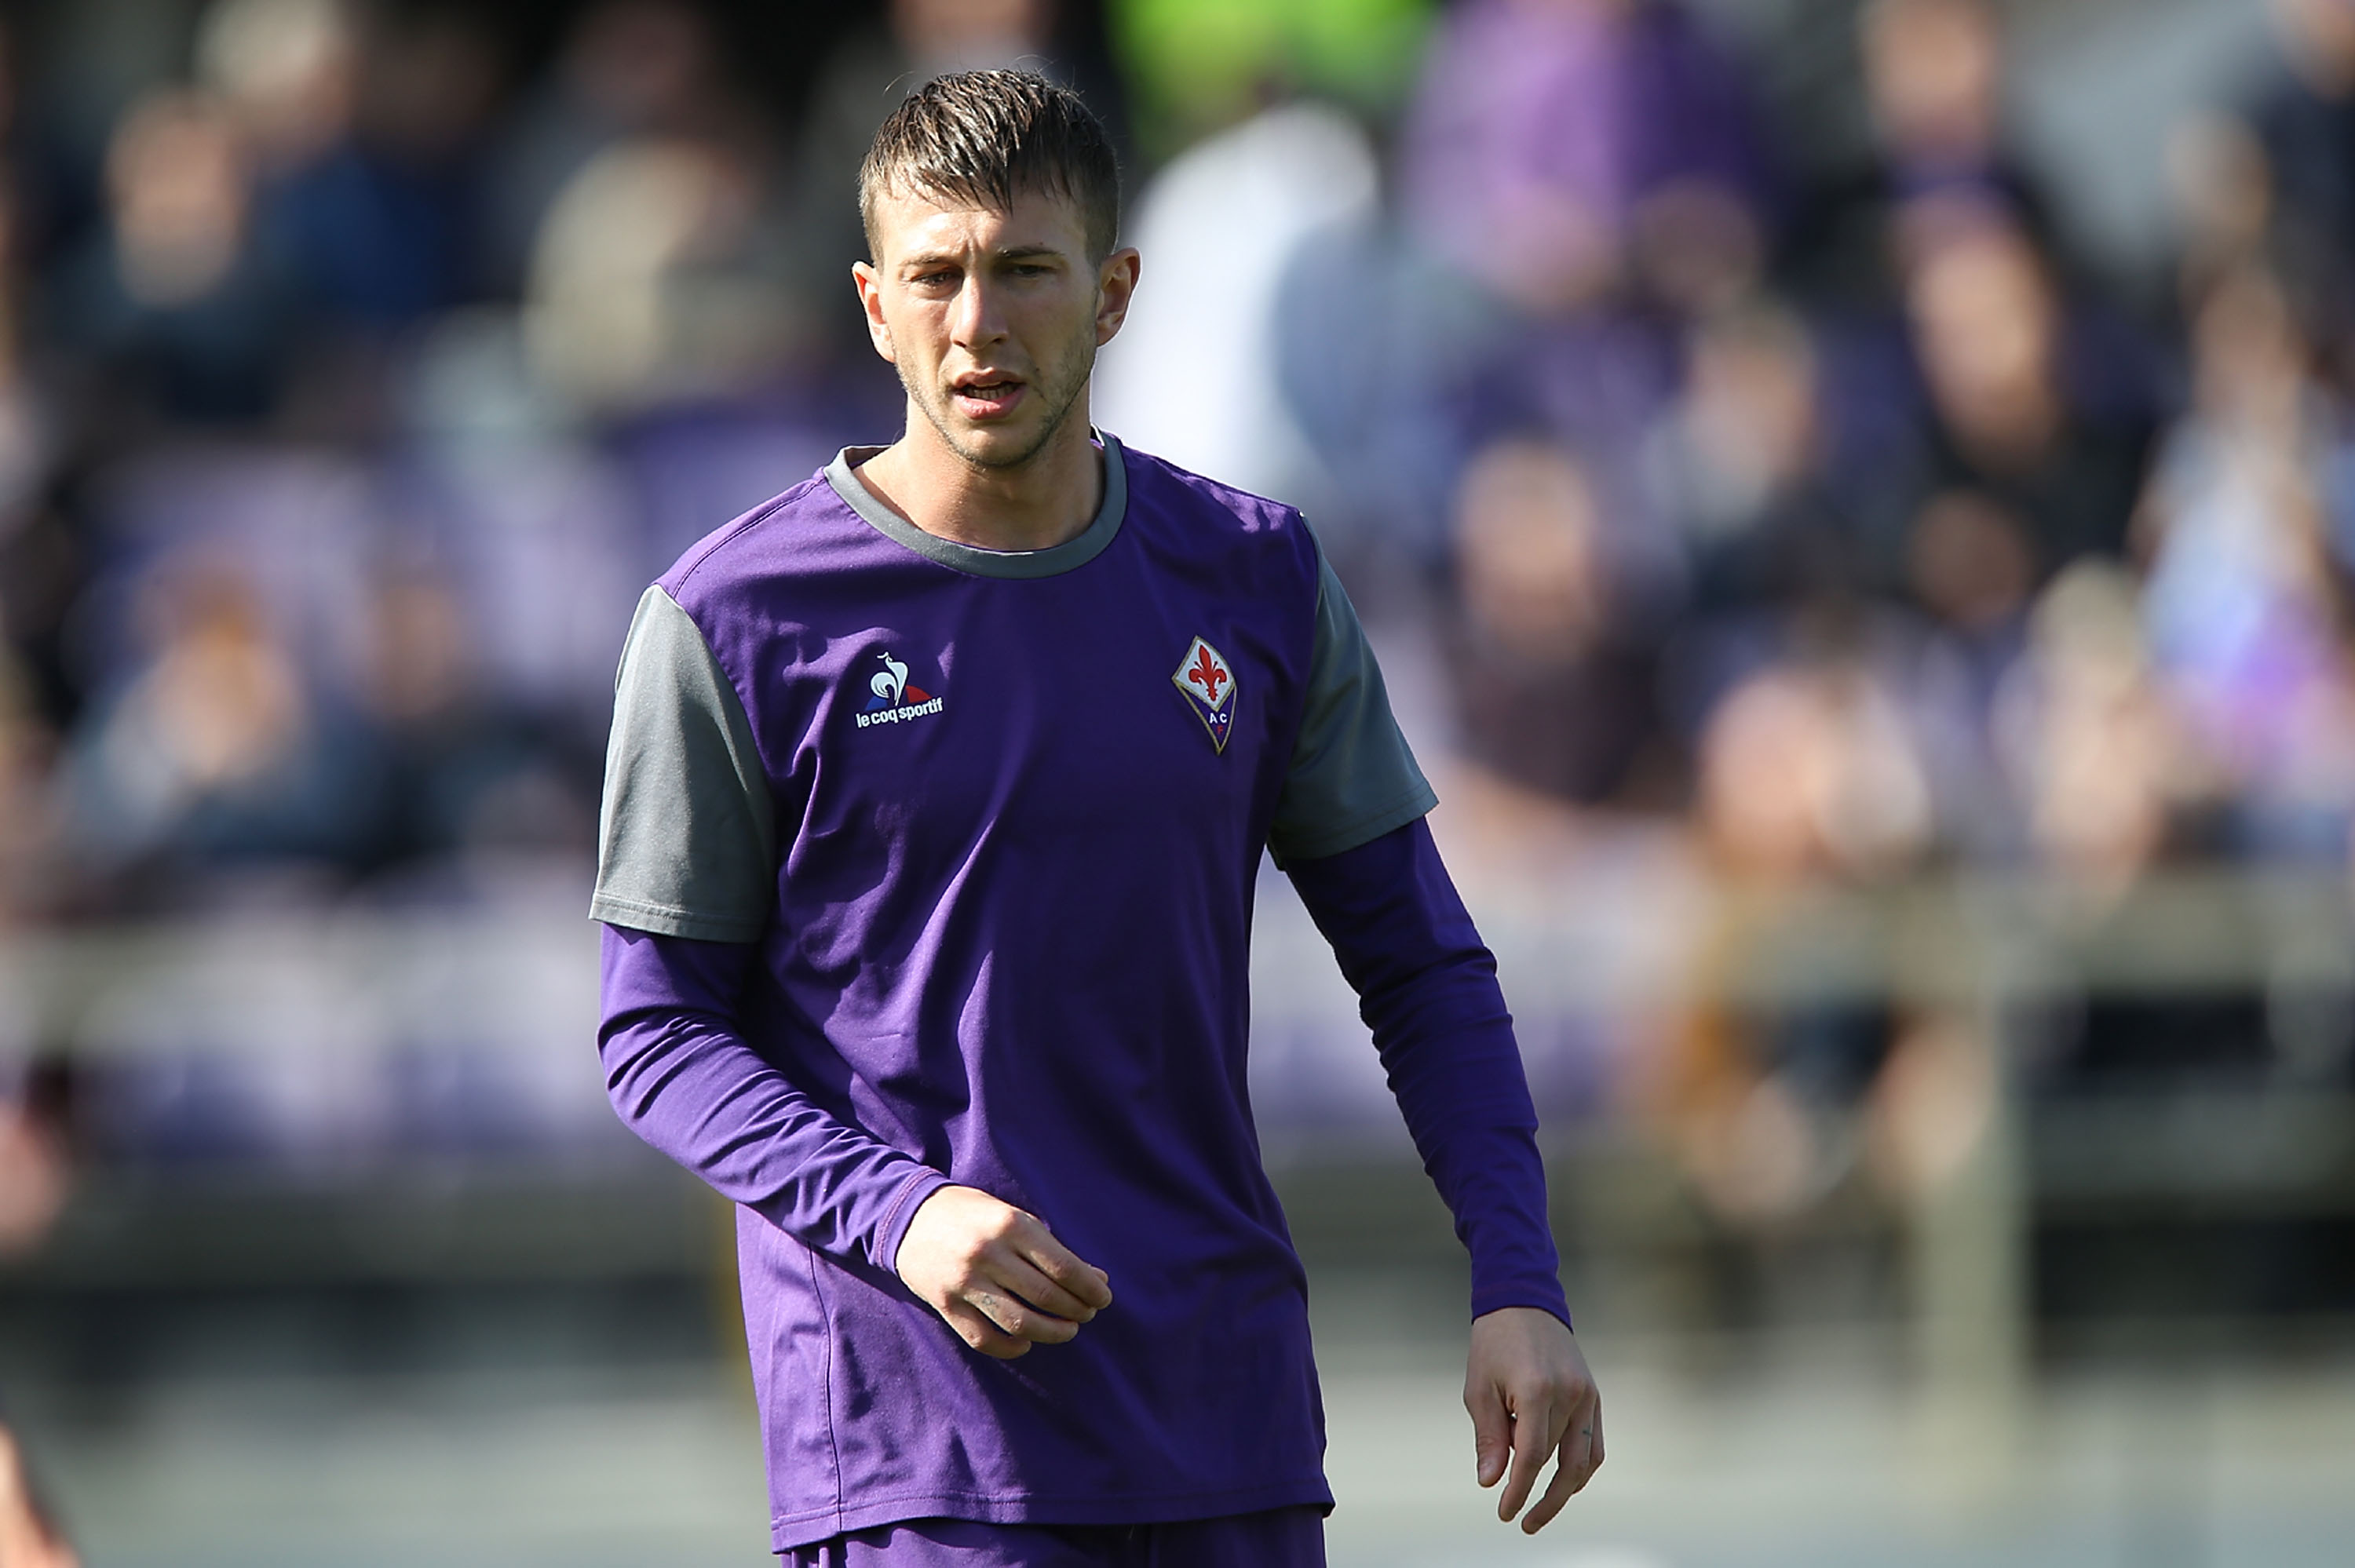 FLORENCE, ITALY - MARCH 12: Federico Bernardeschi of ACF Fiorentina during heating during the Serie A match between ACF Fiorentina and Cagliari Calcio at Stadio Artemio Franchi on March 12, 2017 in Florence, Italy.  (Photo by Gabriele Maltinti/Getty Images)